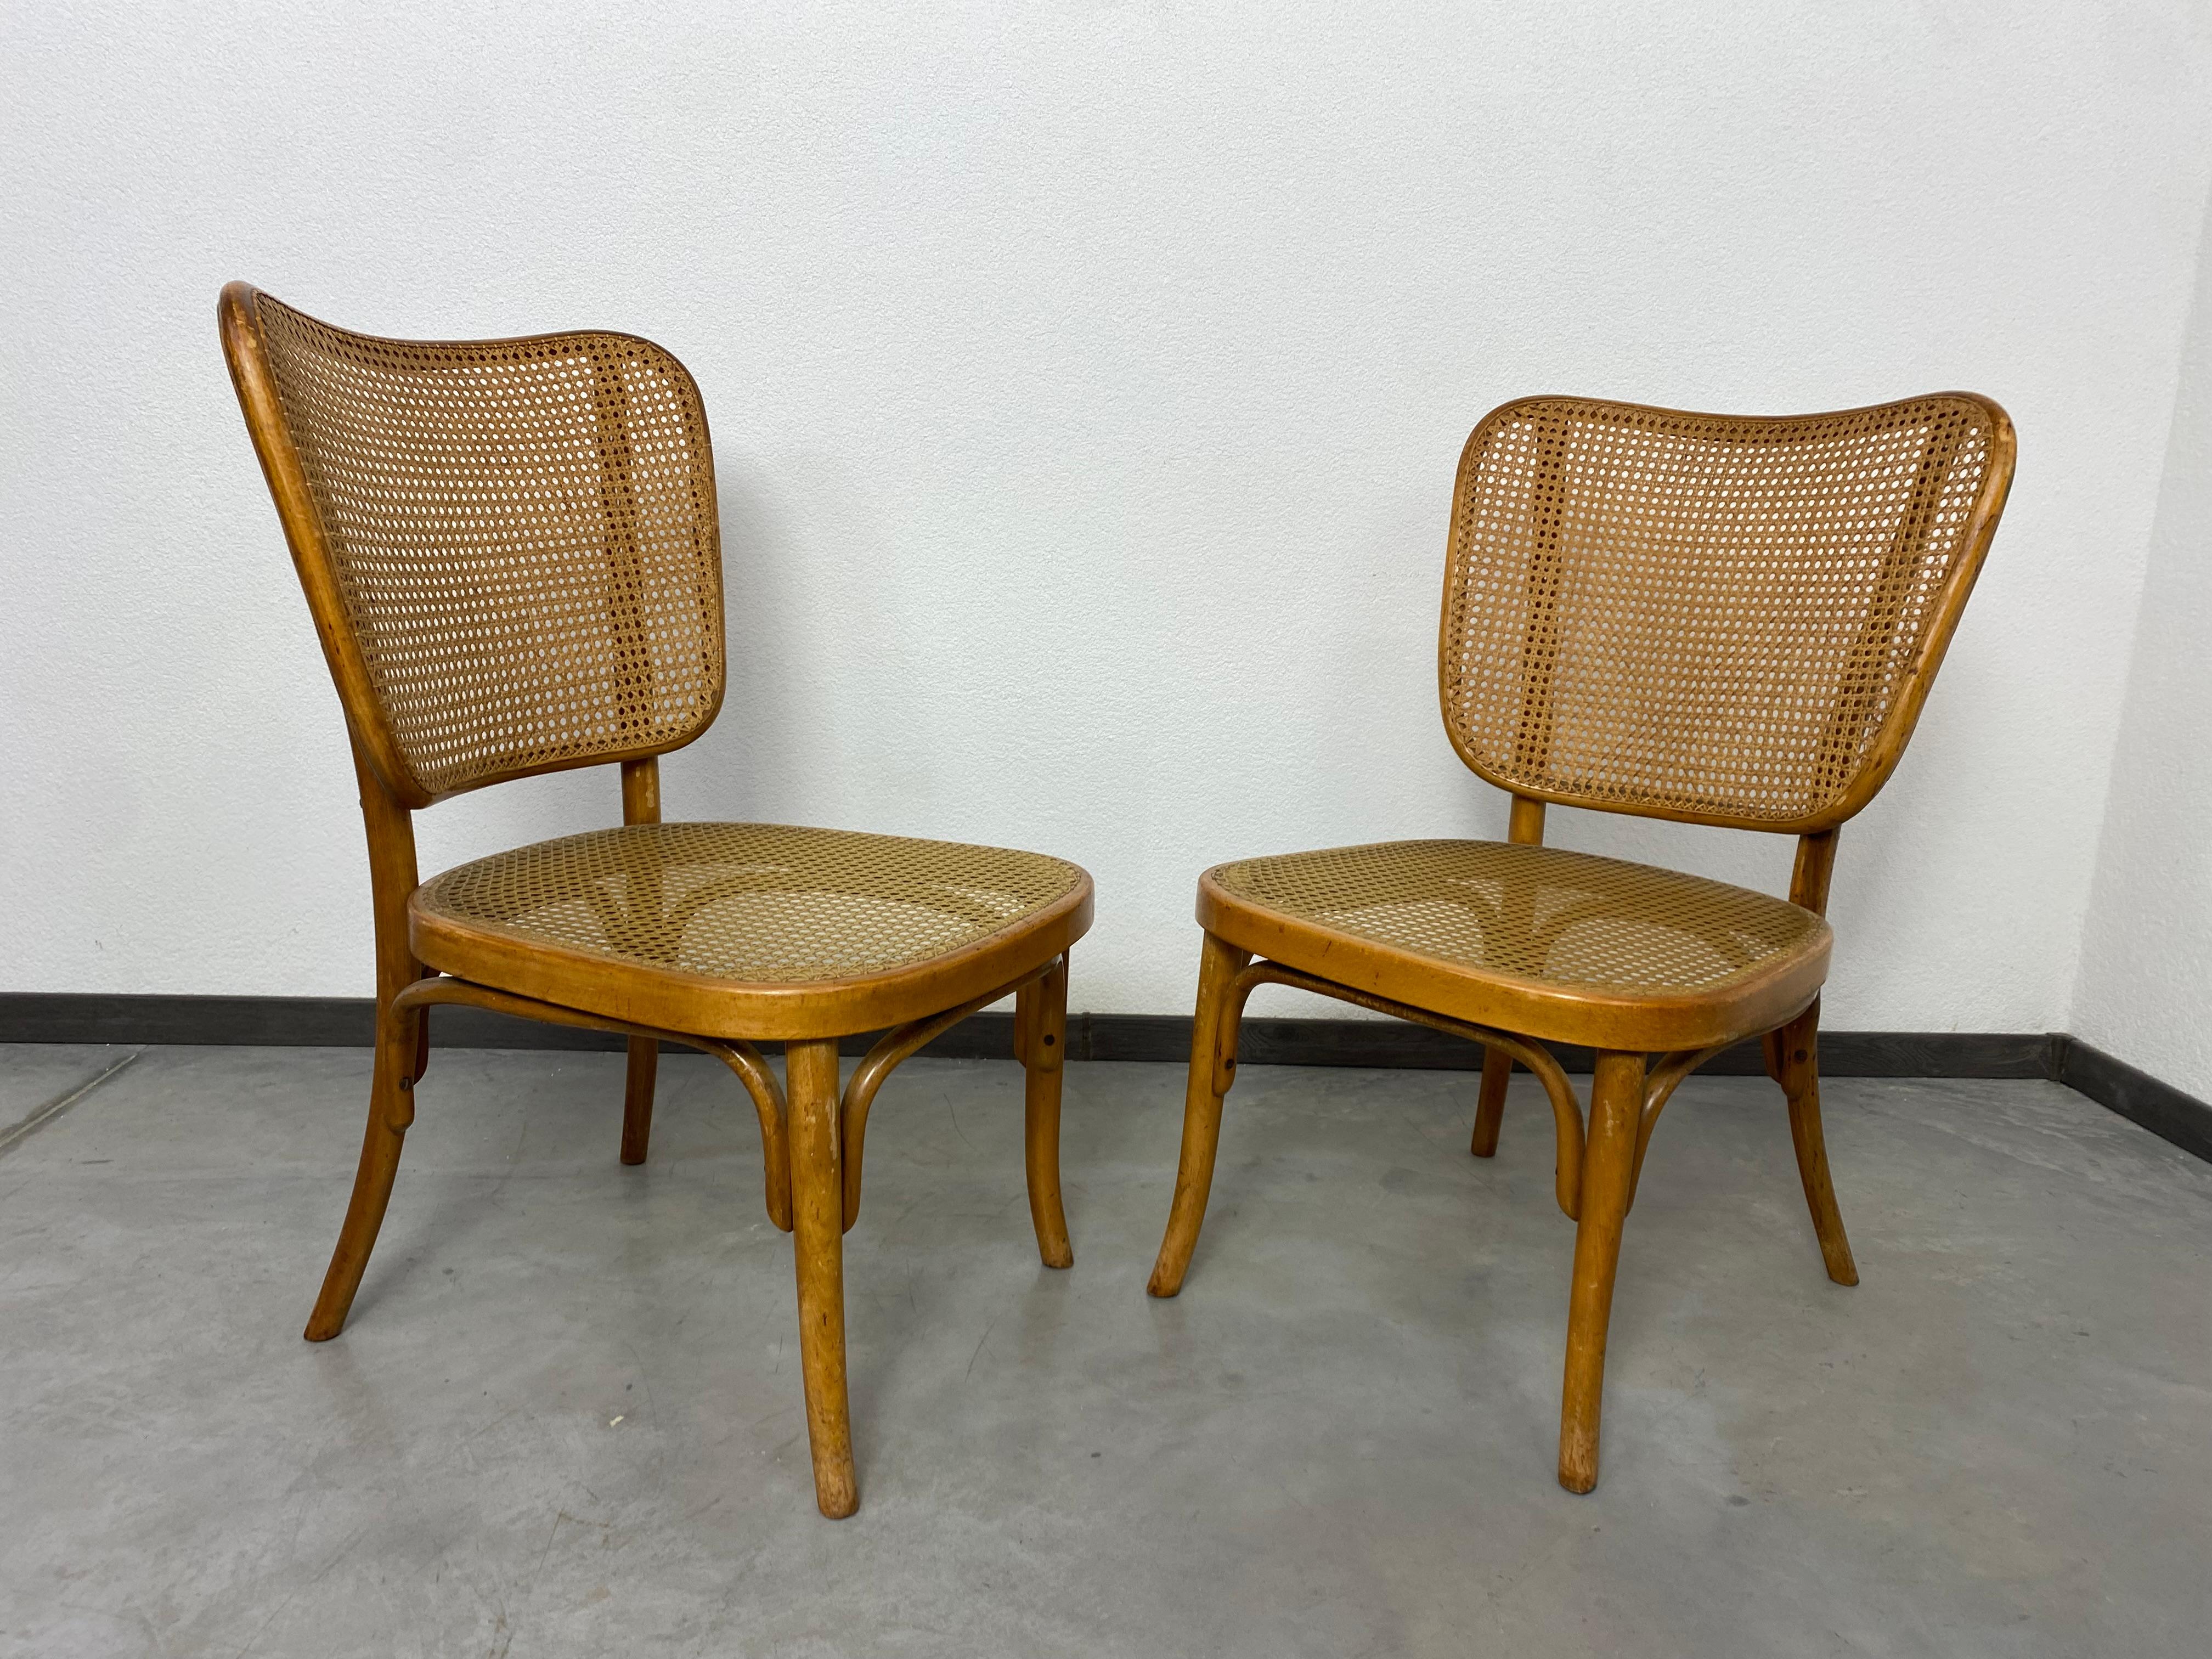 Set of 4 chairs model A821 by Adolf Gustav Schneck for Thonet Mundus In Good Condition For Sale In Banská Štiavnica, SK